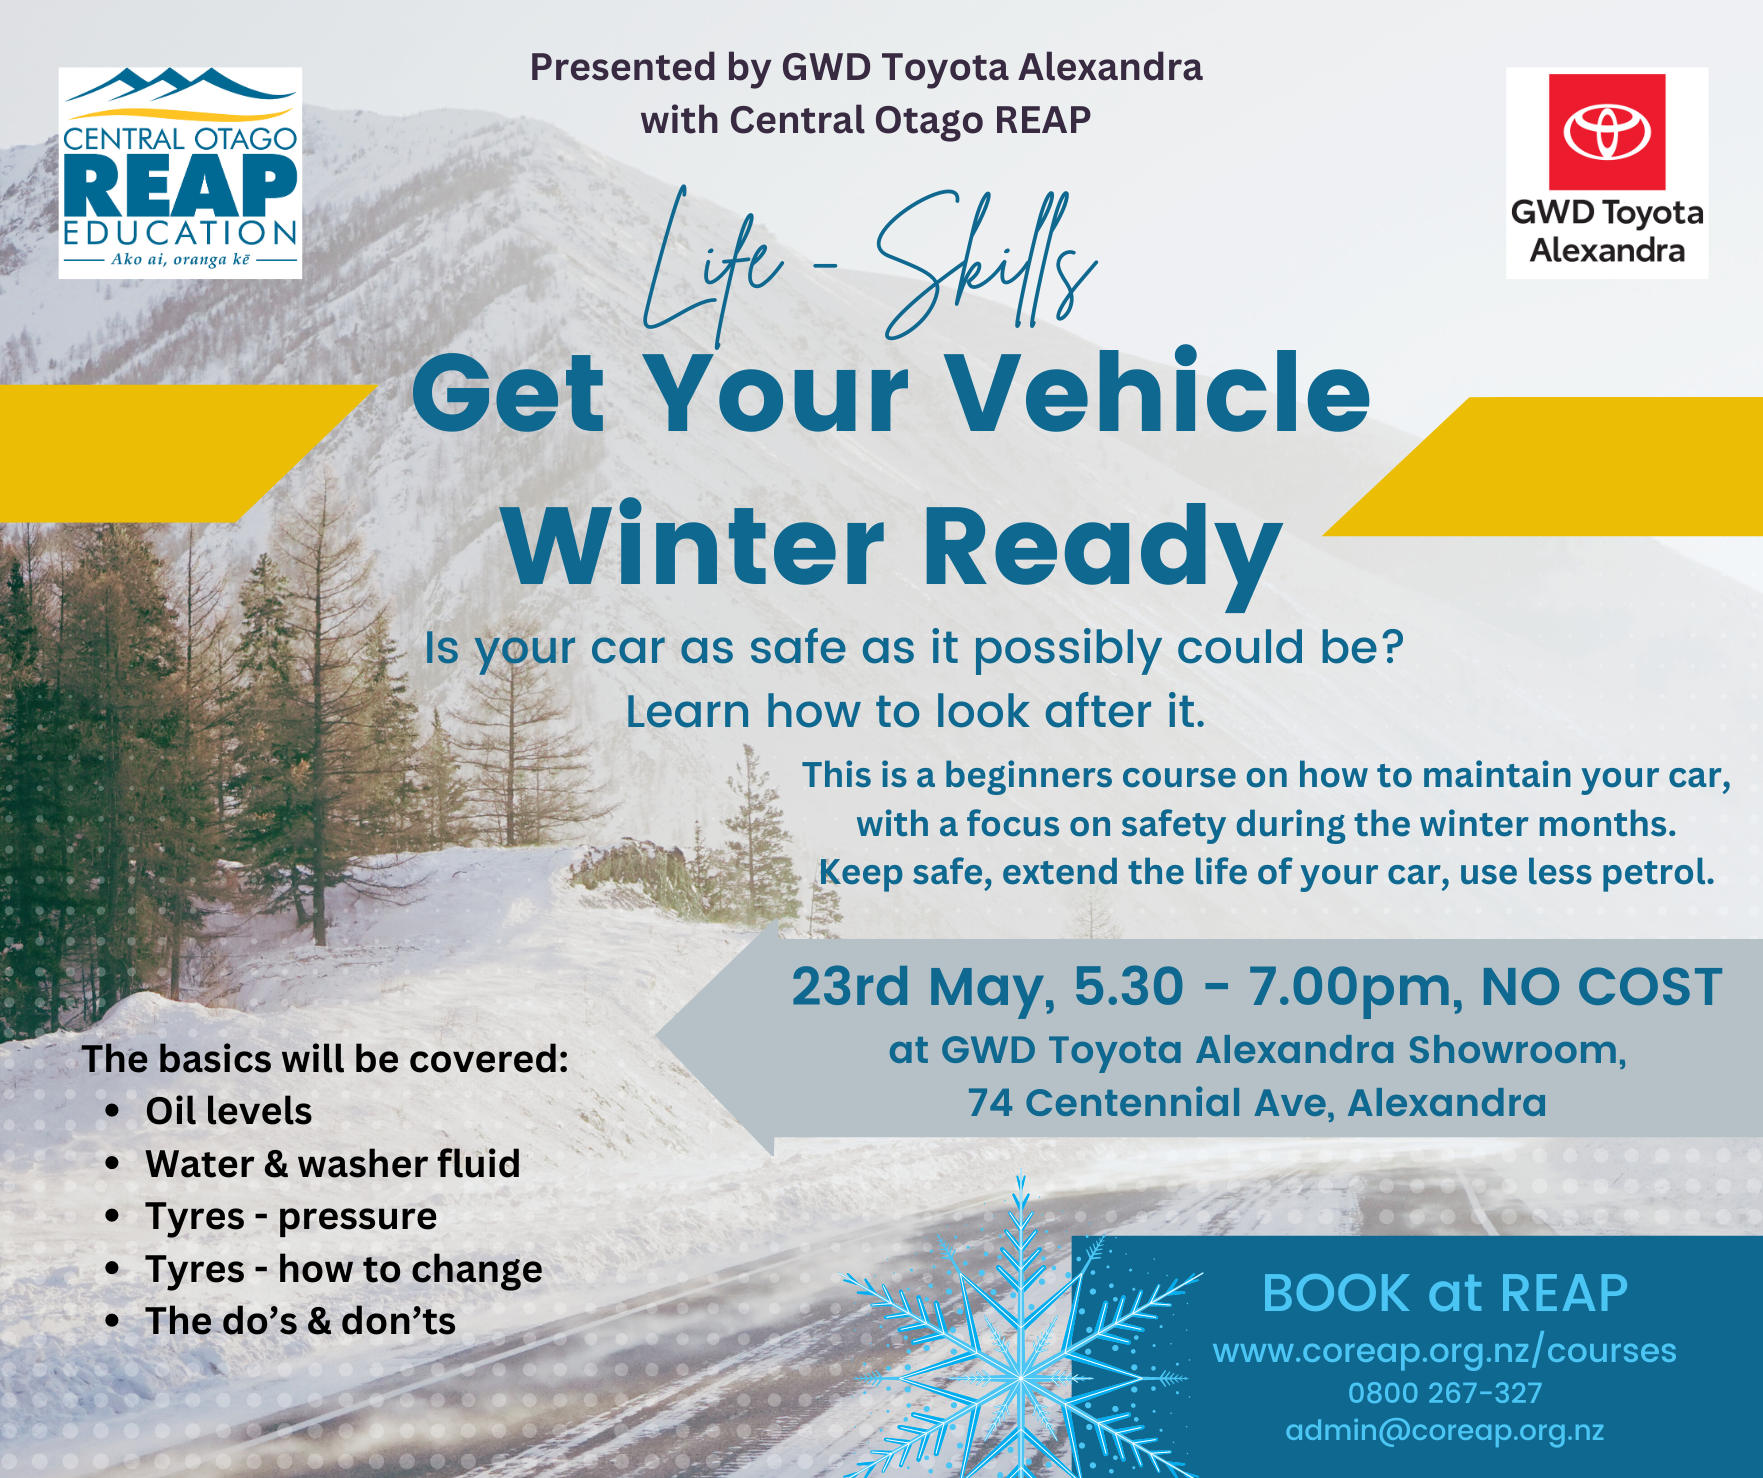 Get Your Vehicle Winter Ready